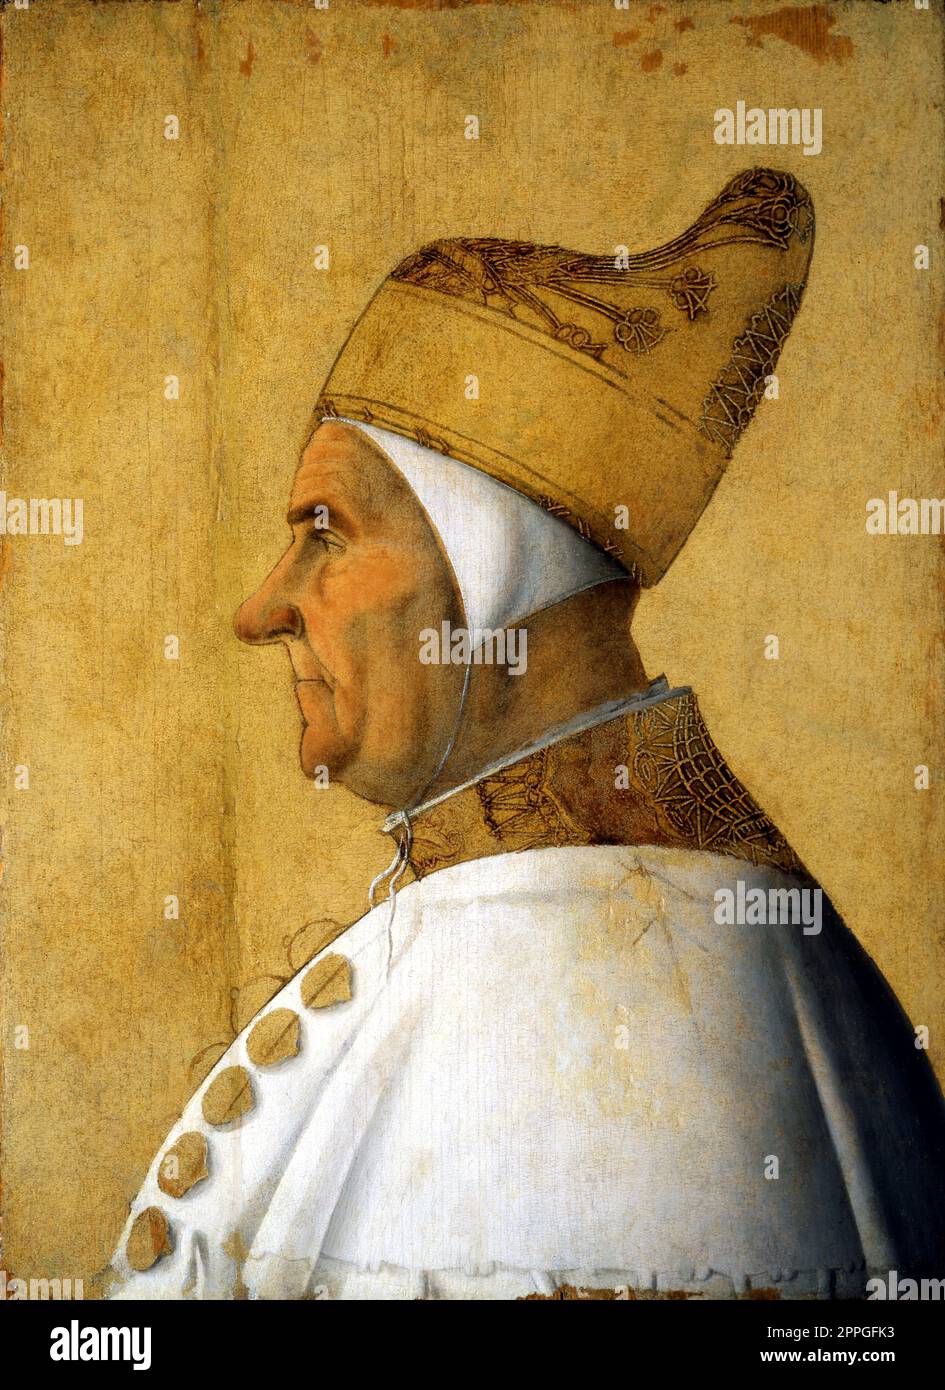 Italy / Venice: Giovanni Mocenigo (1408 - 4 November 1485), Doge of Venice (1478-1485). Tempera on panel painting by Gentile Bellini (1429-1507), c. 1478-1479.  Giovanni Mocenigo was Doge of Venice (r. 1478-1485), hailing from a very distinguished family. His brother, Pietro Mocenigo, had served as Doge before him.  He fought at sea against the Ottoman Sultan Mehmed II and on land against Ercole I d'Este, Duke of Ferrara, from whom he recaptured Rovigo and the Polesine. His dogaressa was Taddea Michiel (d. 1479), who was the last dogaressa to be crowned in Venice until Zilia Dandolo in 1557. Stock Photo